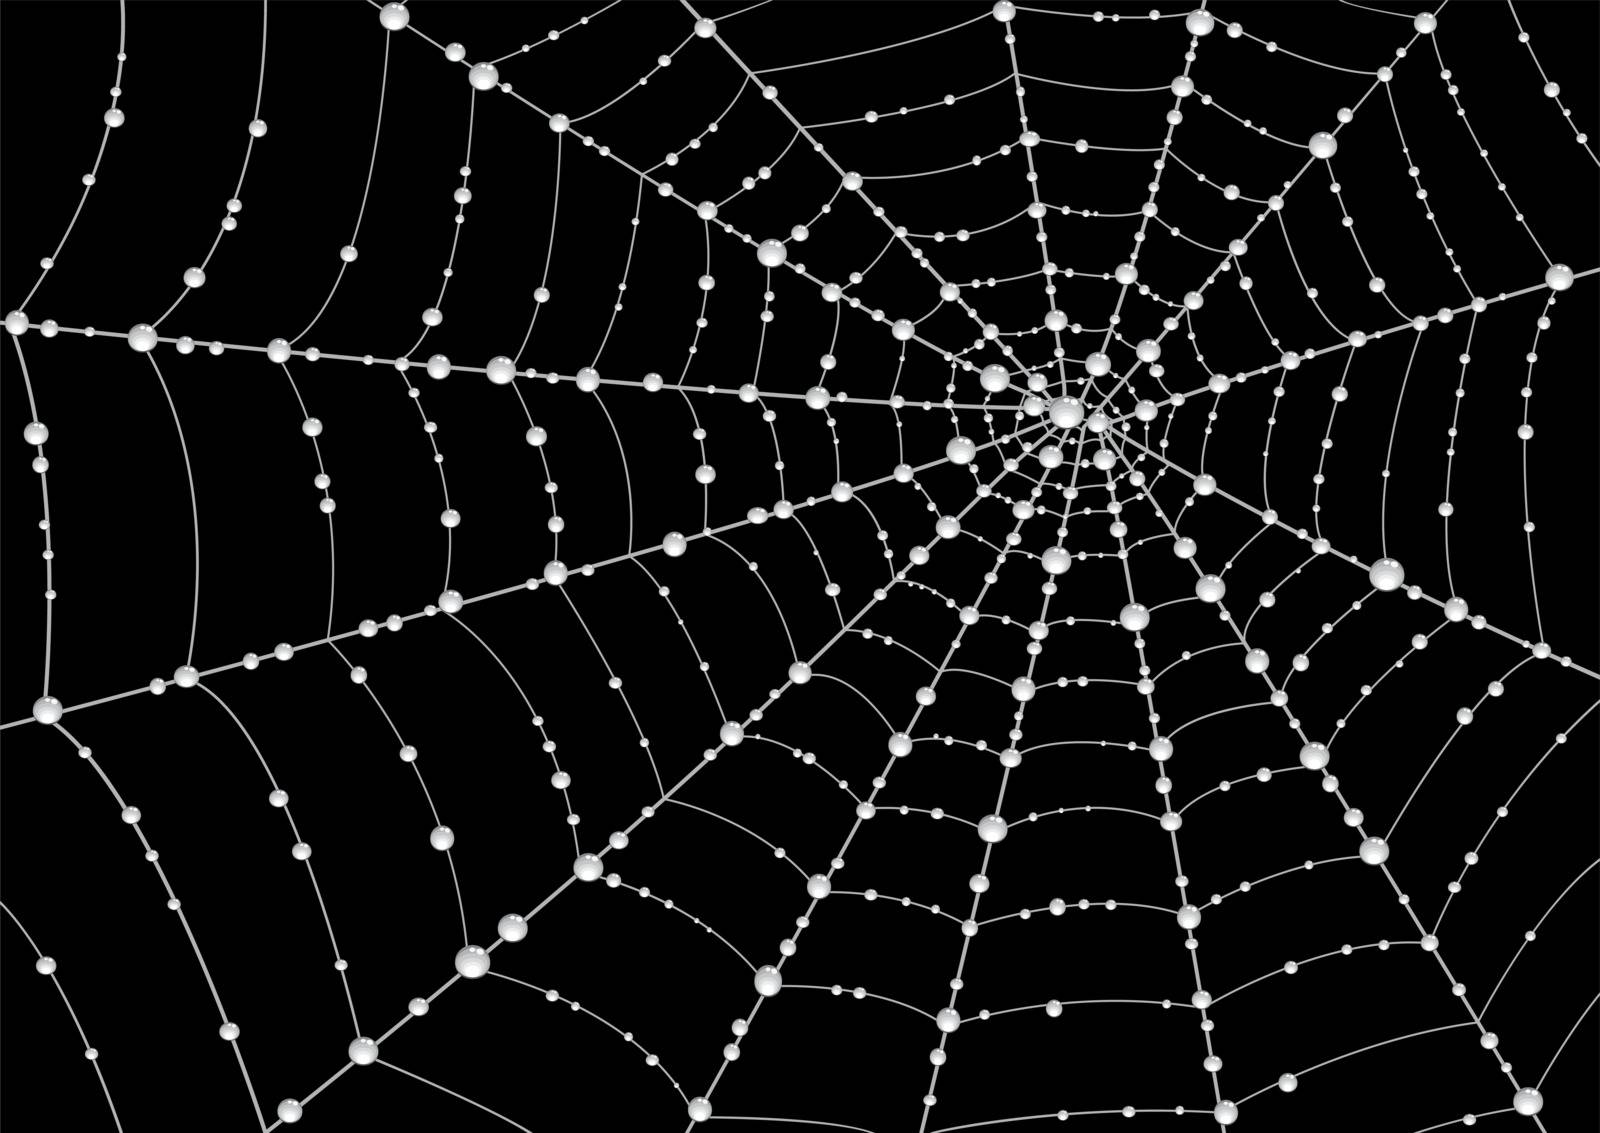 Web in drops of dew on a black background